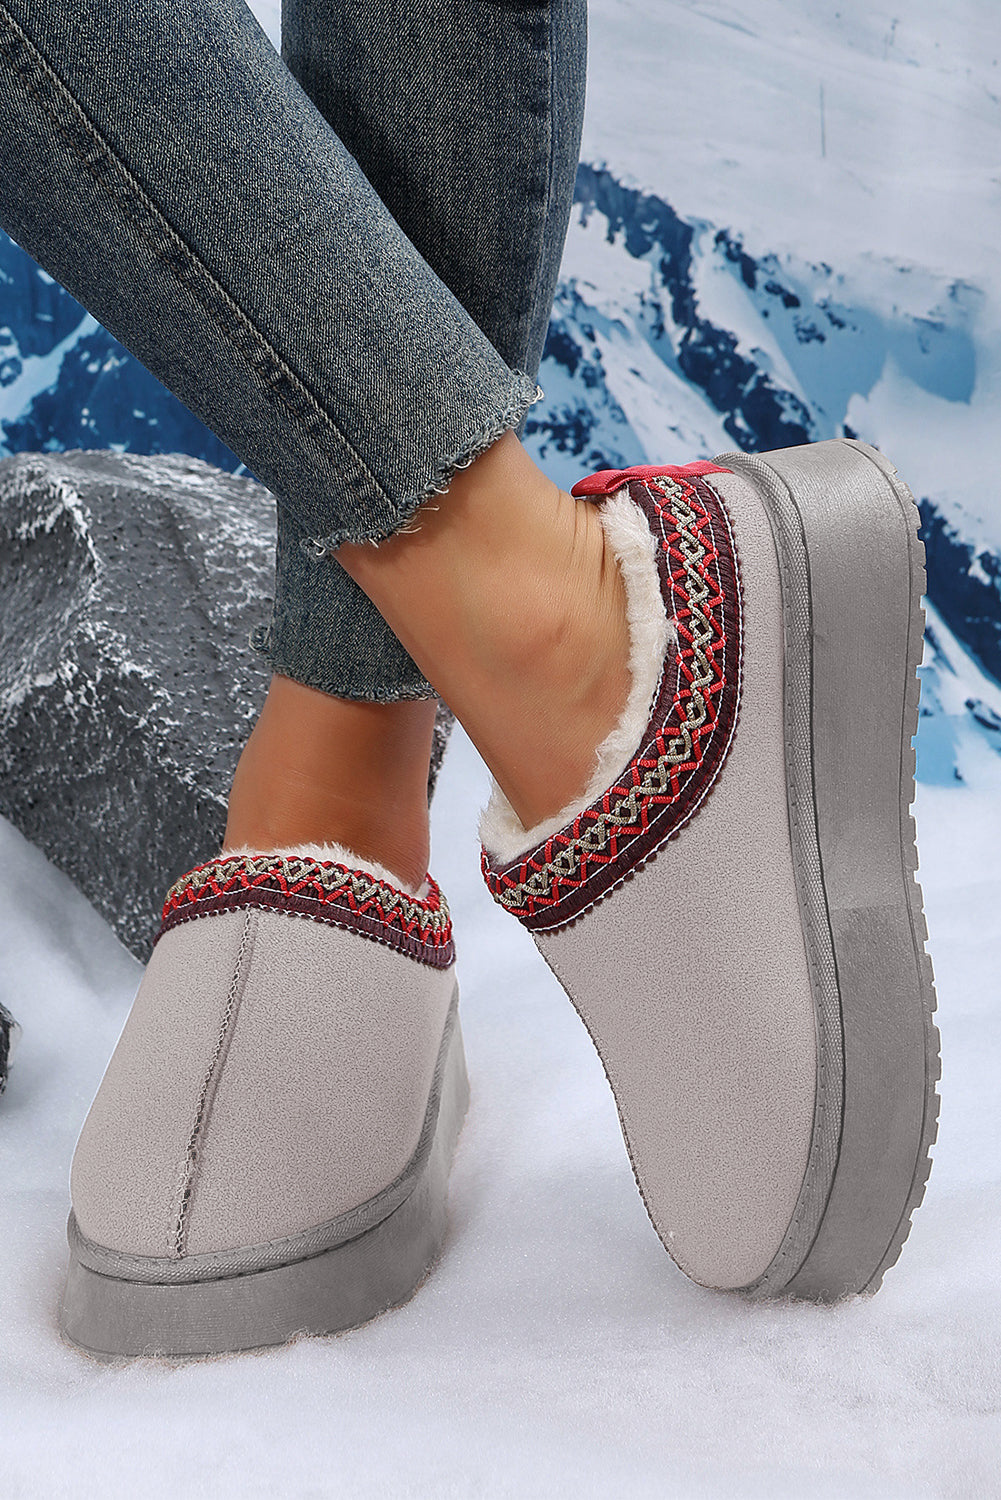 Gray Suede Contrast Print Plush Lined Snow Boots